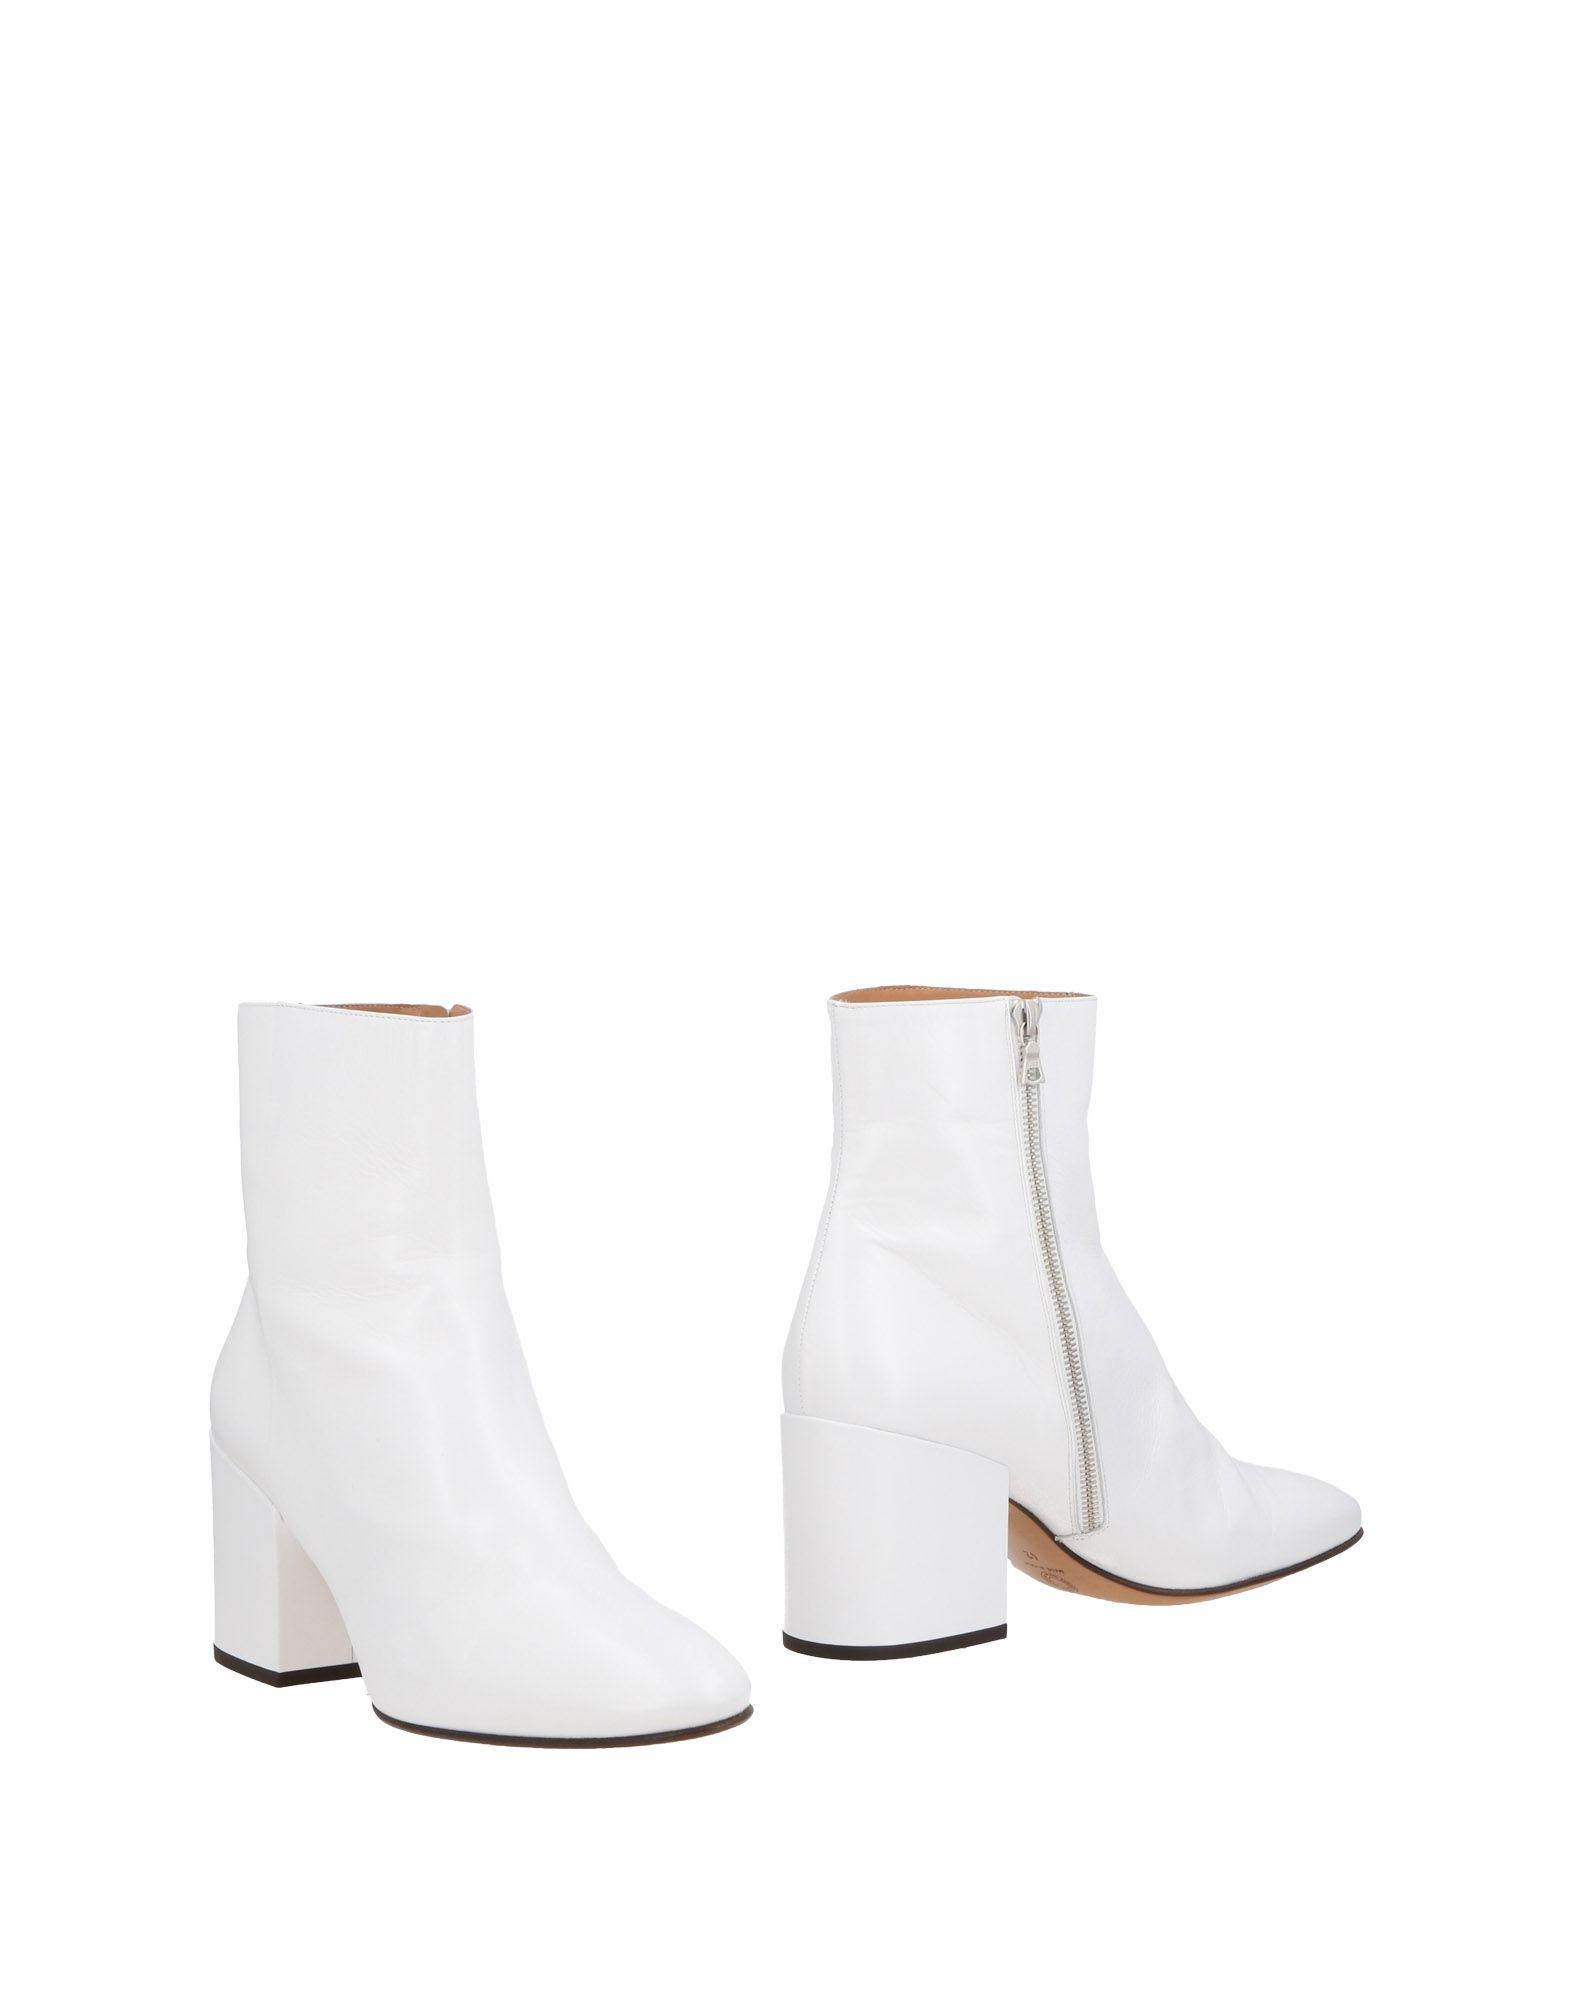 Dries Van Noten Ankle Boots In White 